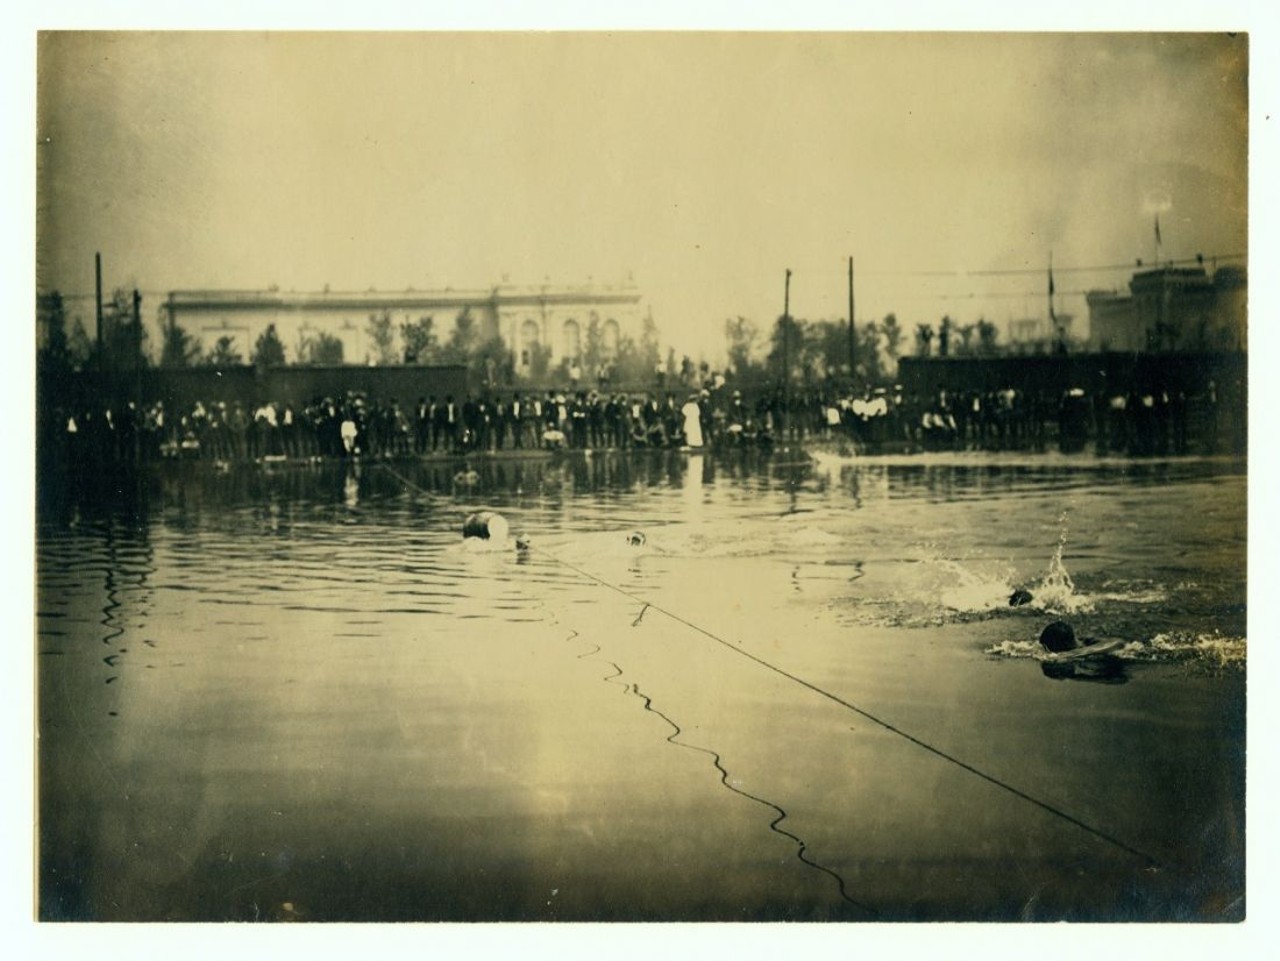 Finish of the First Heat of the 50 Yard Swim at the 1904 Olympics. 
Other places the games took place were Creve Coeur Lake for the rowing events and Glen Echo Park for golf.